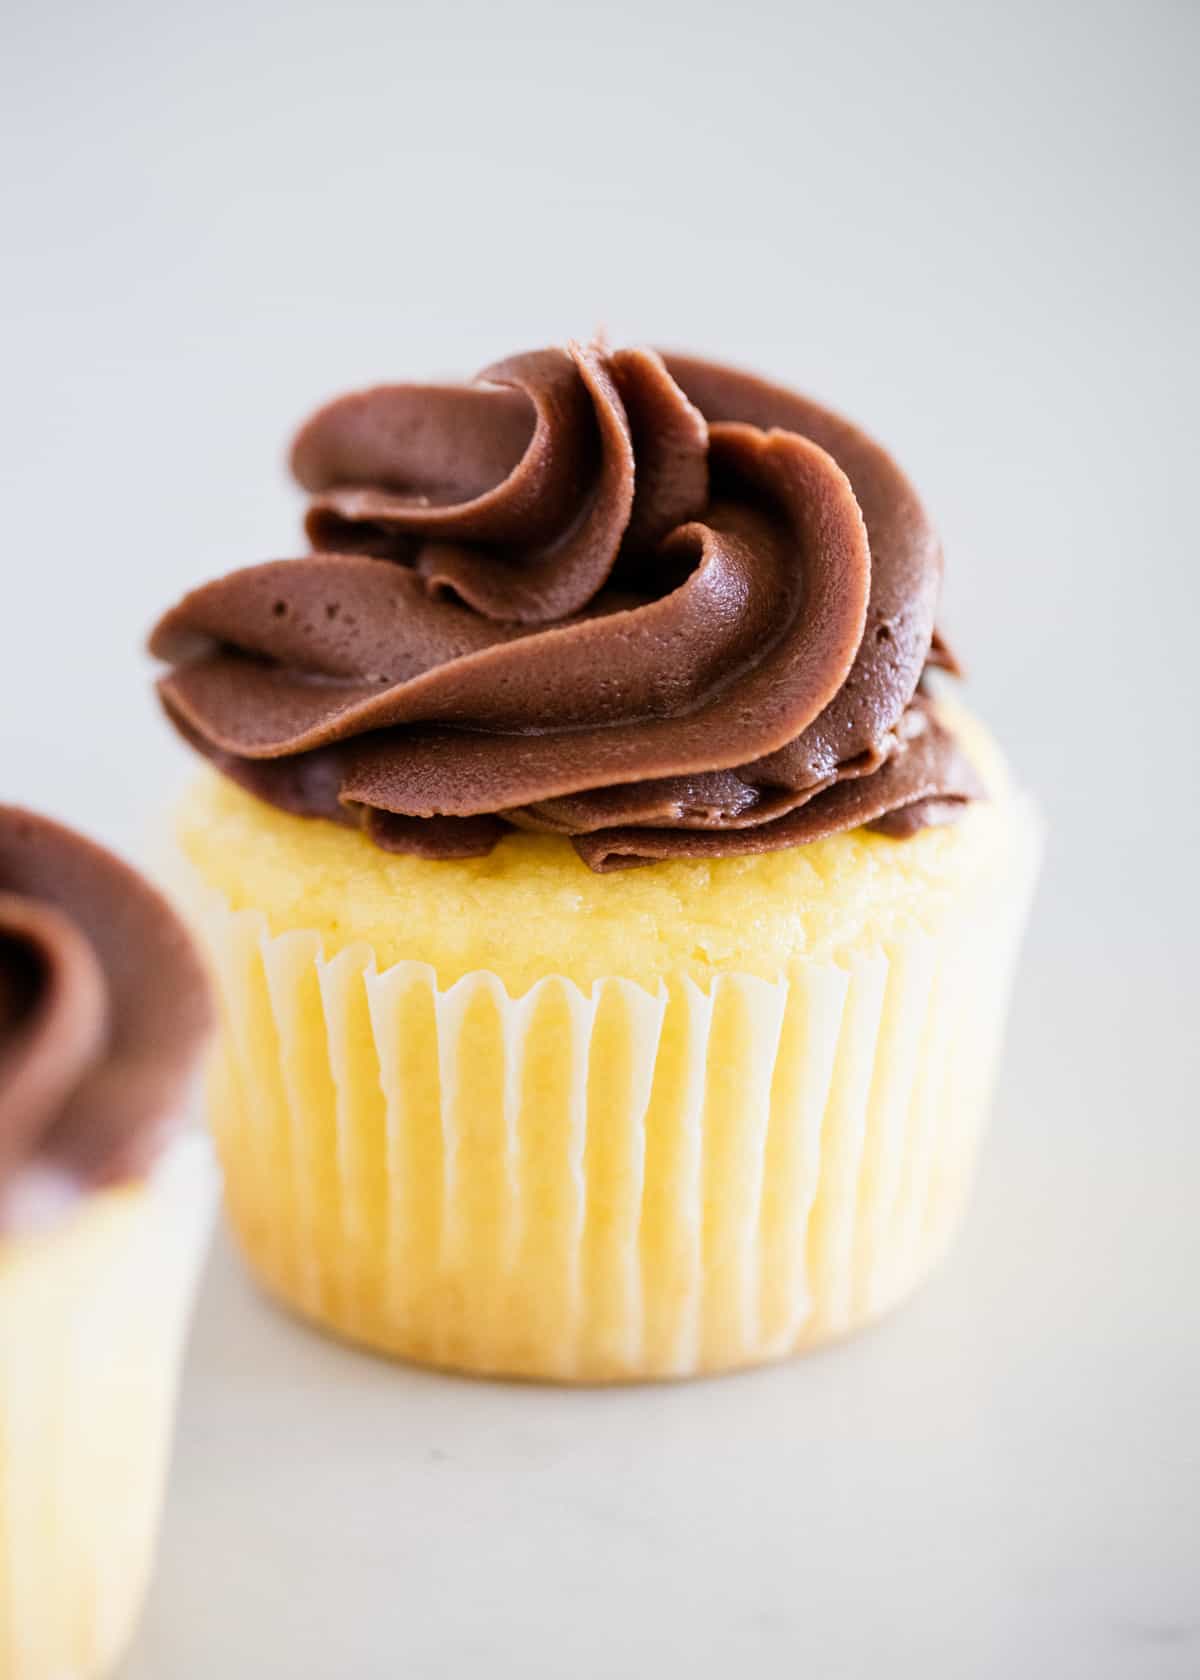 Vanilla cupcake with chocolate frosting.